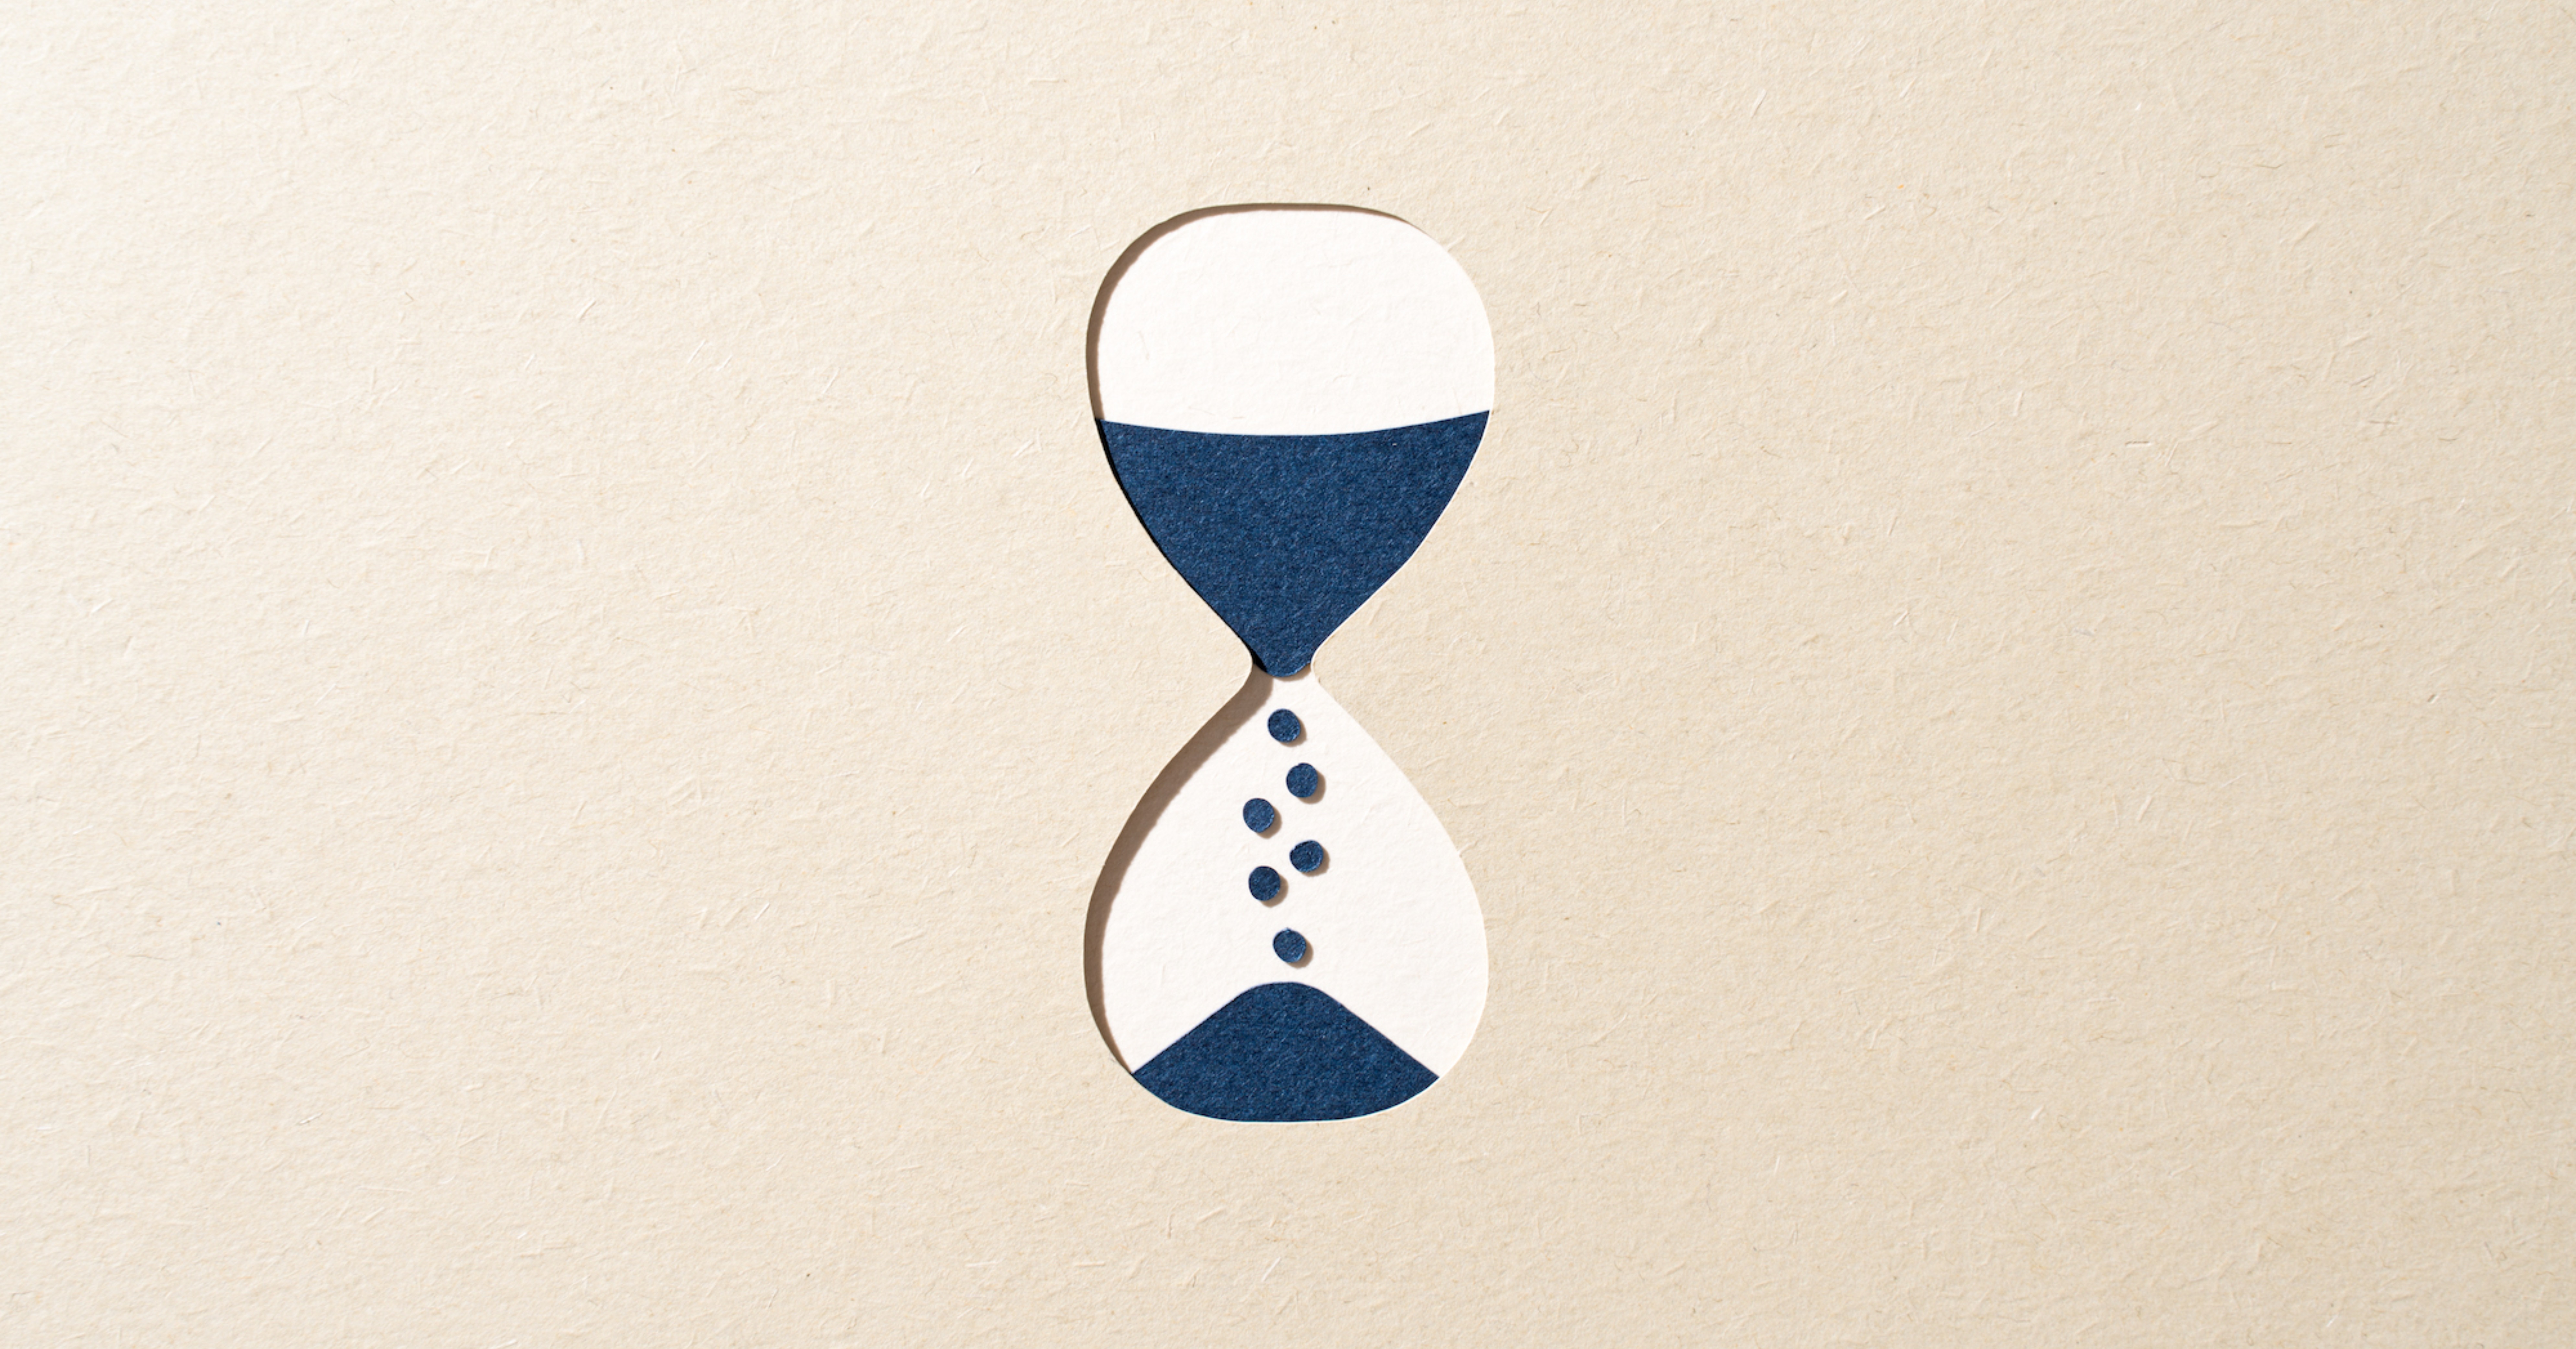 Paper cut out of an hourglass 